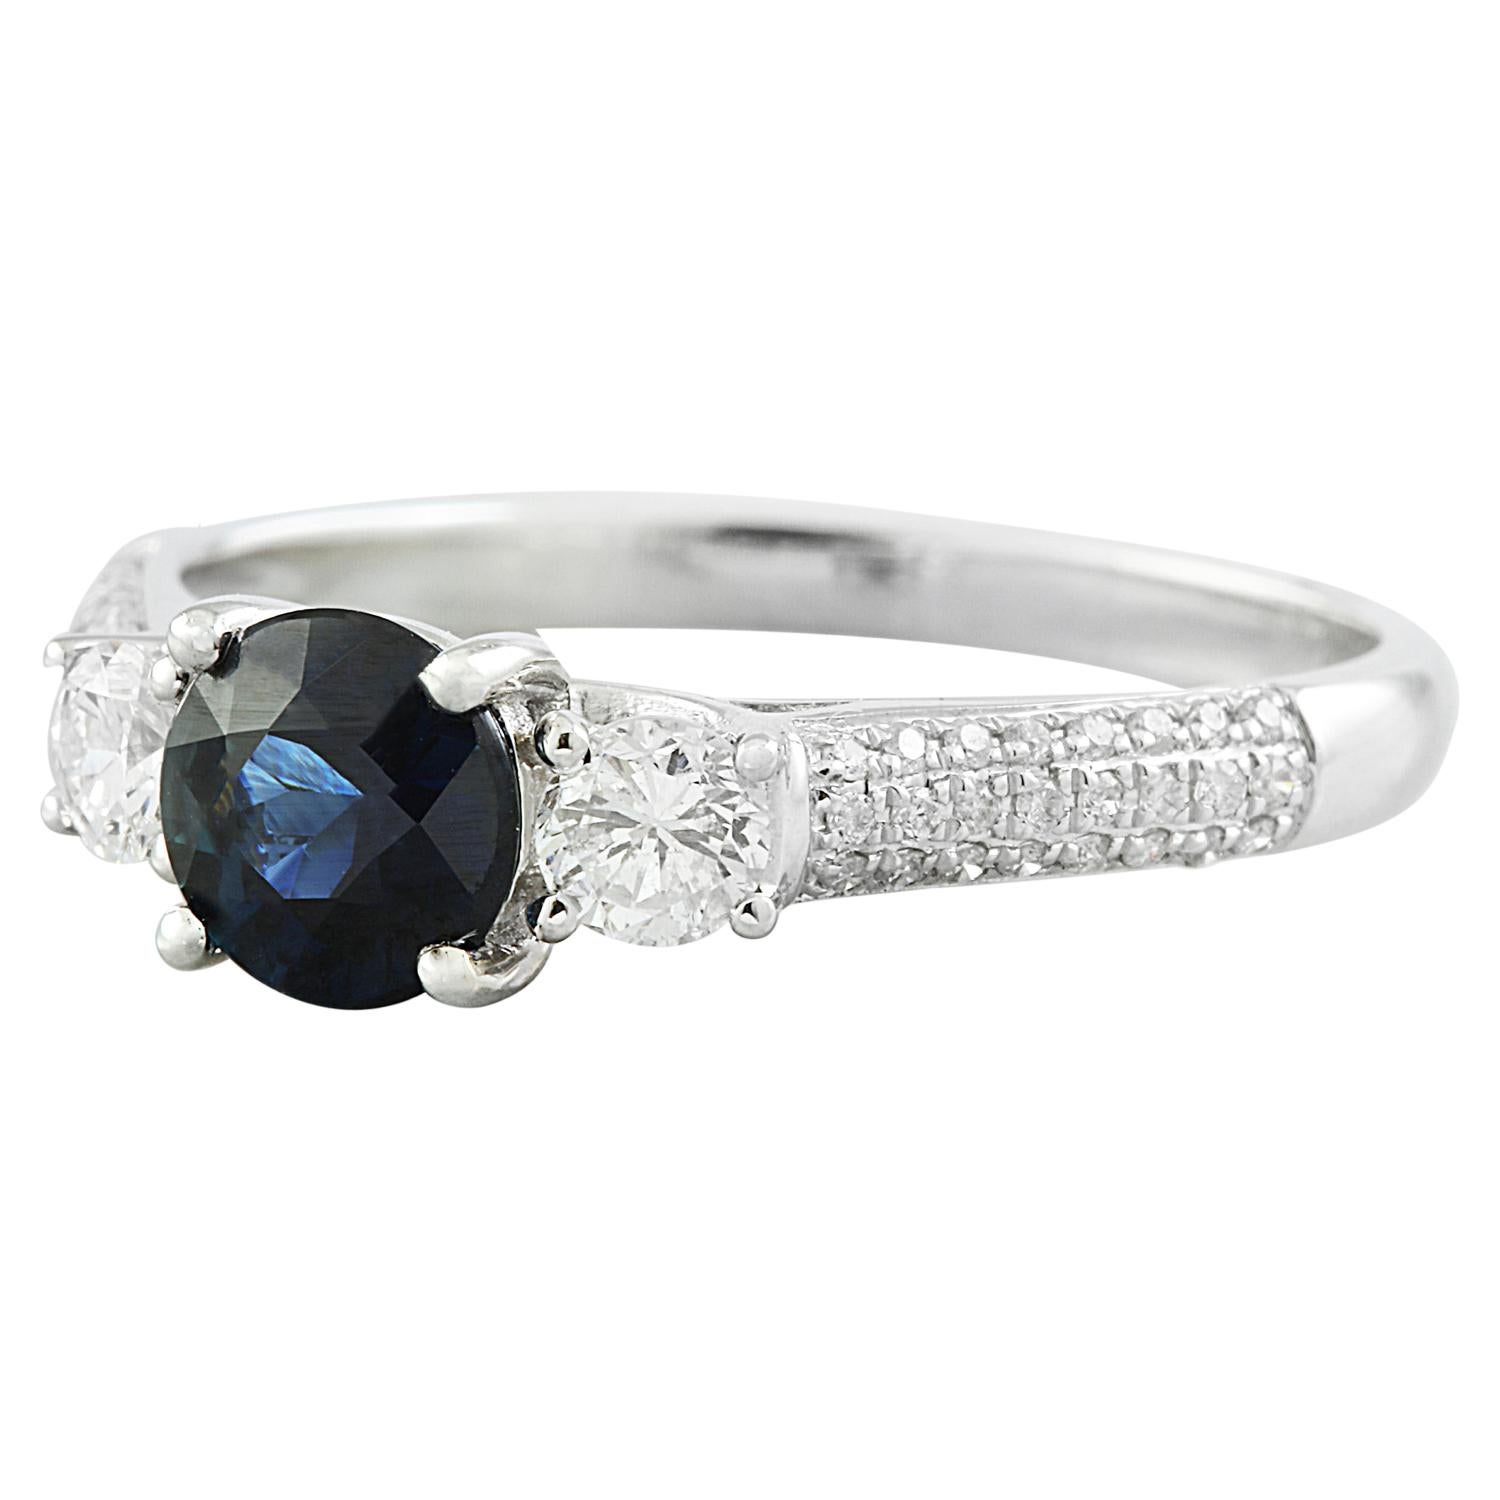 Introducing our stunning 14K Solid White Gold Diamond Ring, featuring a captivating 1.56 Carat Natural Sapphire. Stamped with authenticity, this ring exudes quality craftsmanship and timeless elegance. Weighing 2.4 grams in total, it showcases a